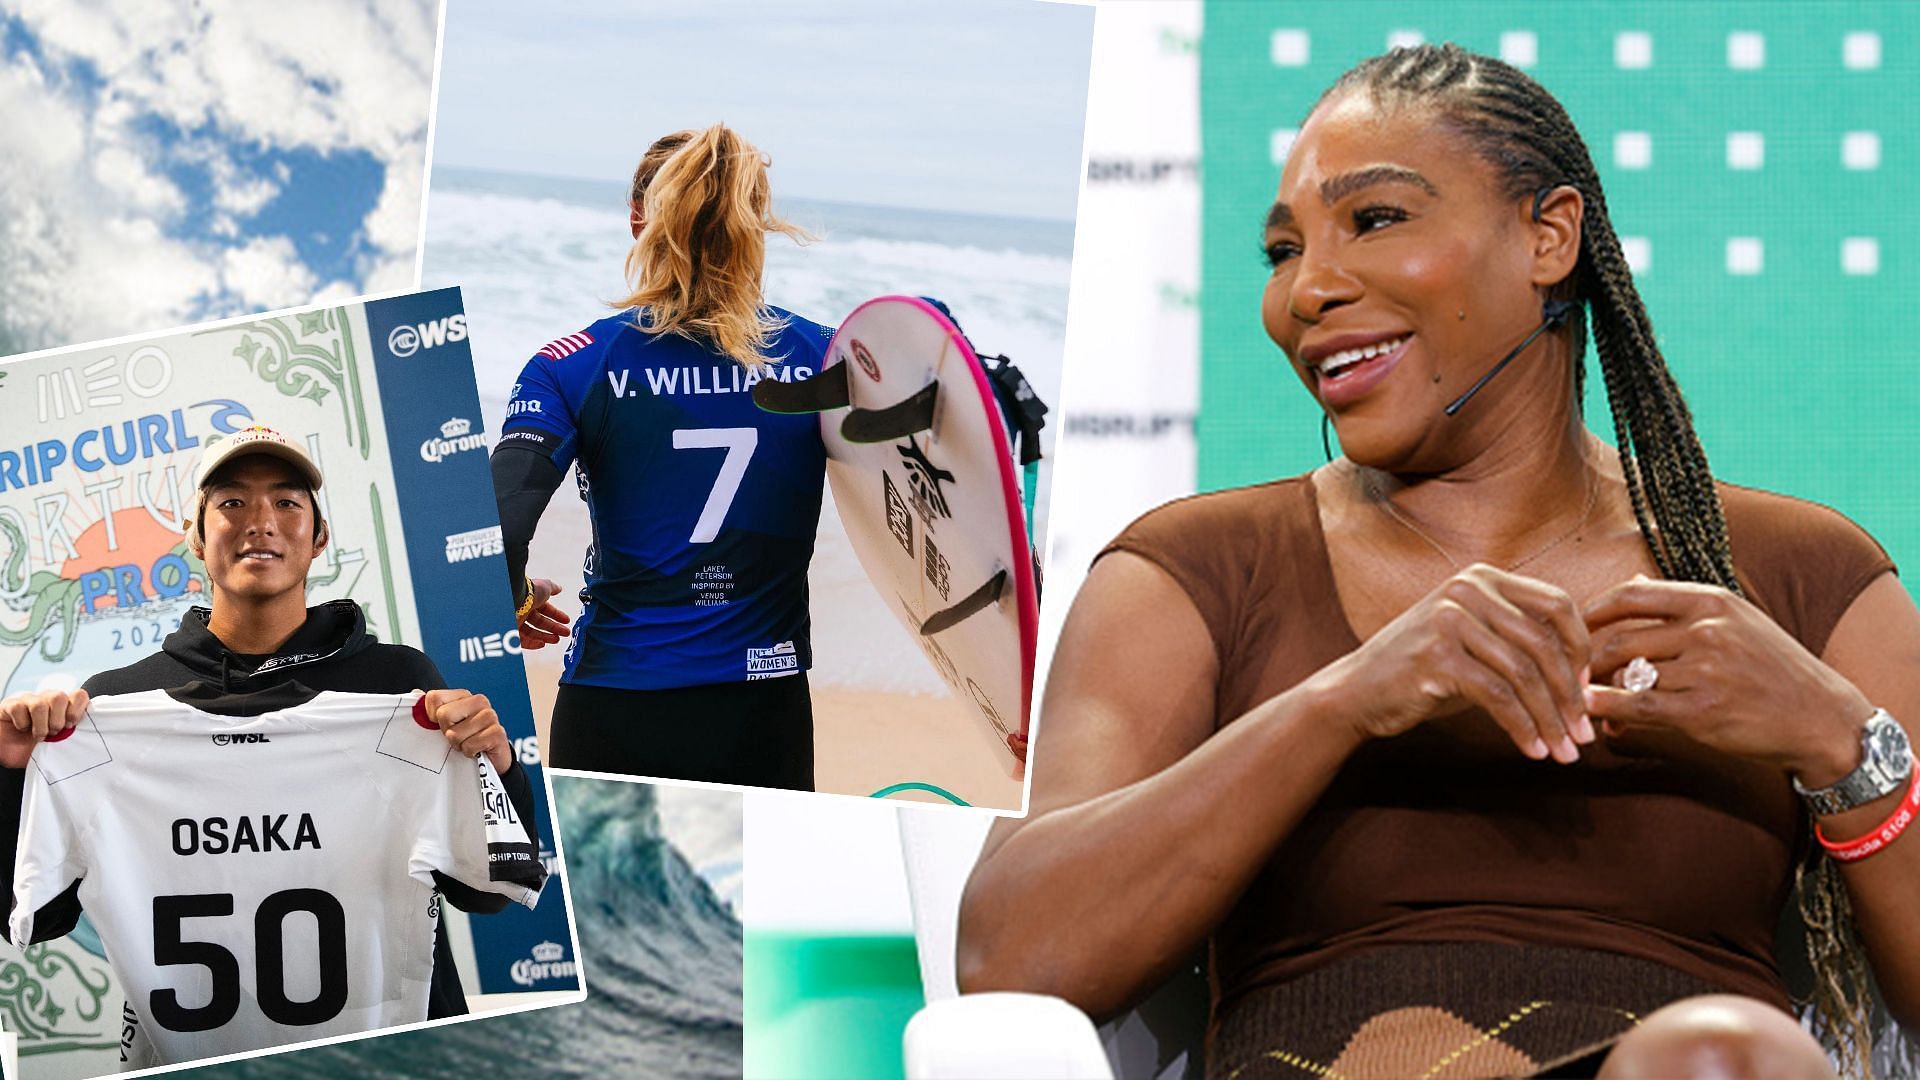 In pictures: Venus and Serena Williams, Naomi Osaka among women given special Women's Day tribute by World Surf League stars